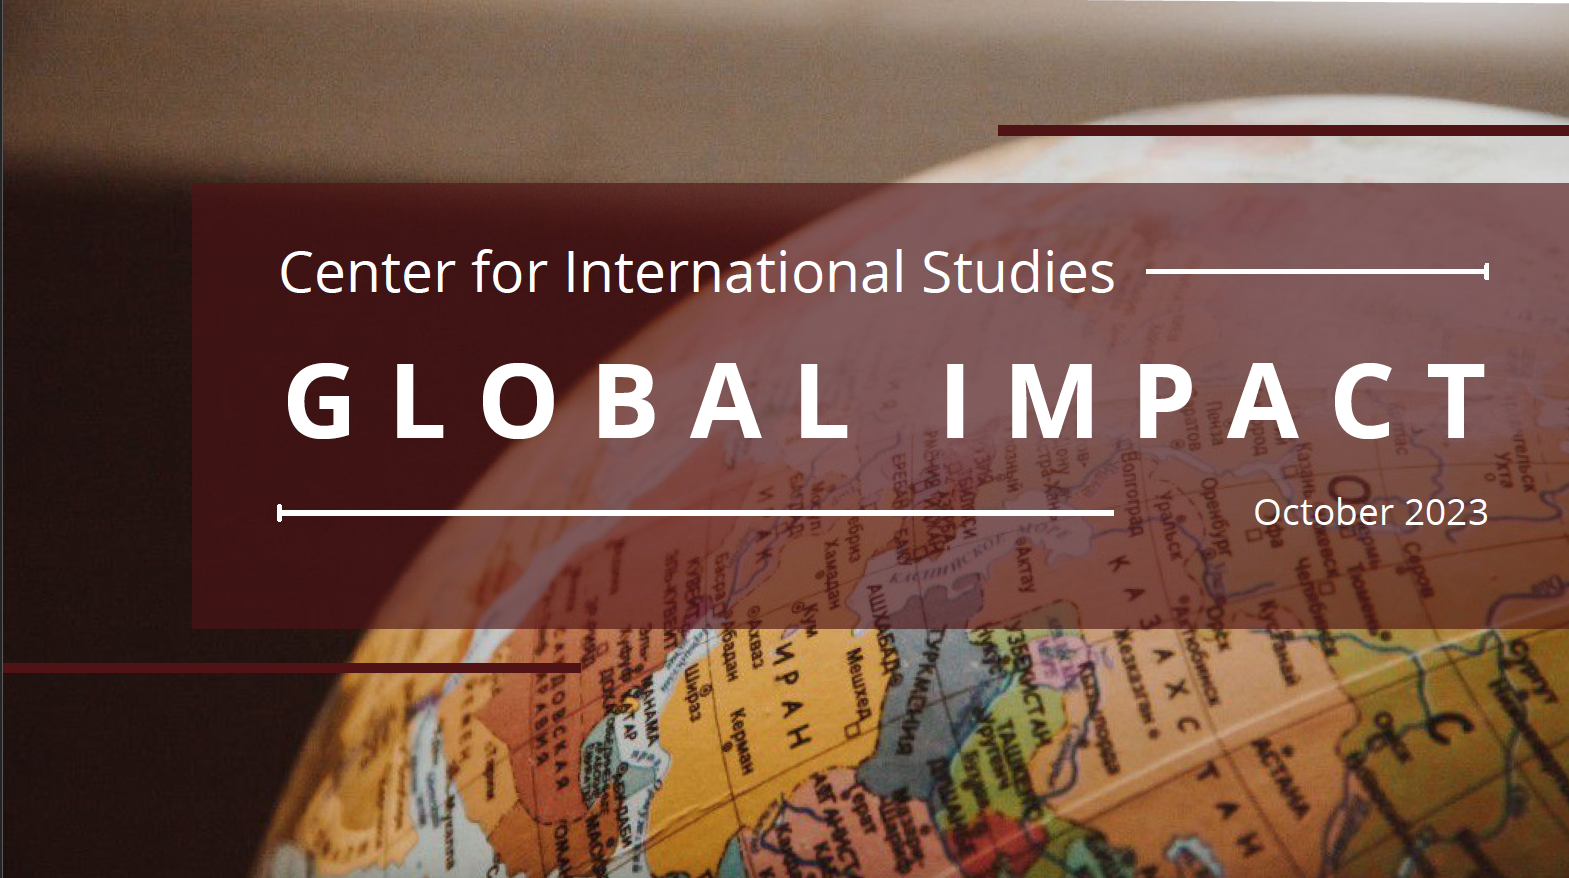 Global Impact Newsletter logo on top of image of a globe